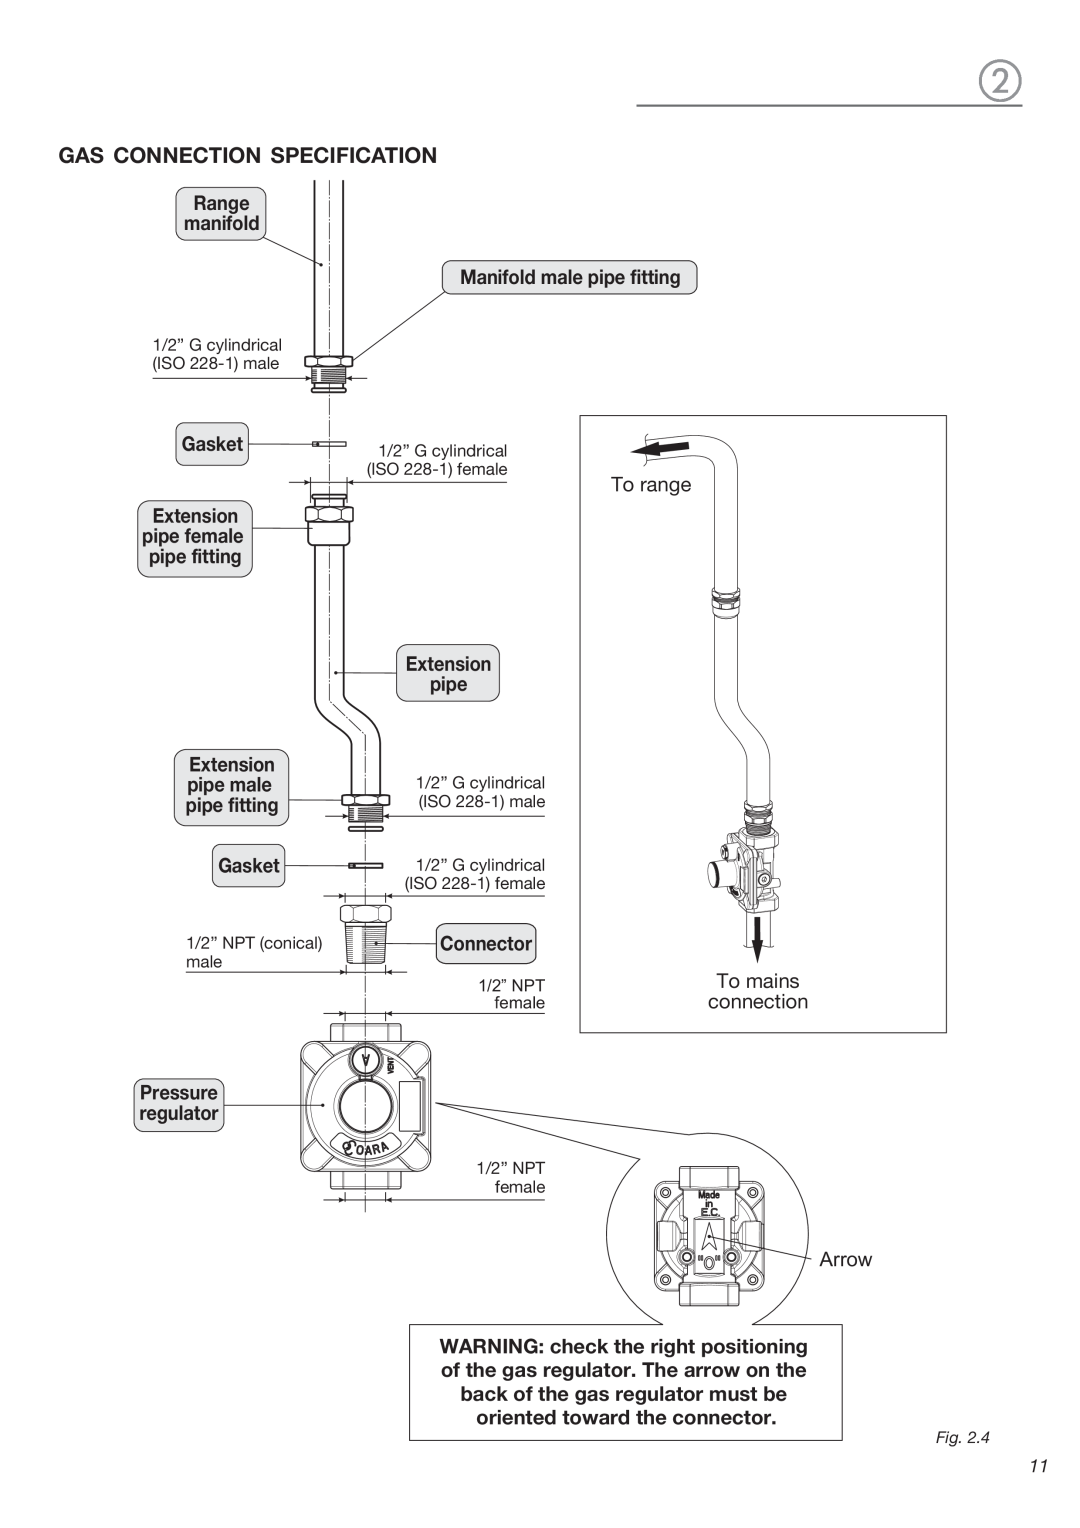 DeLonghi DEGESC24SS installation instructions Gas Connection Specification, To range, To mains, connection, Arrow 